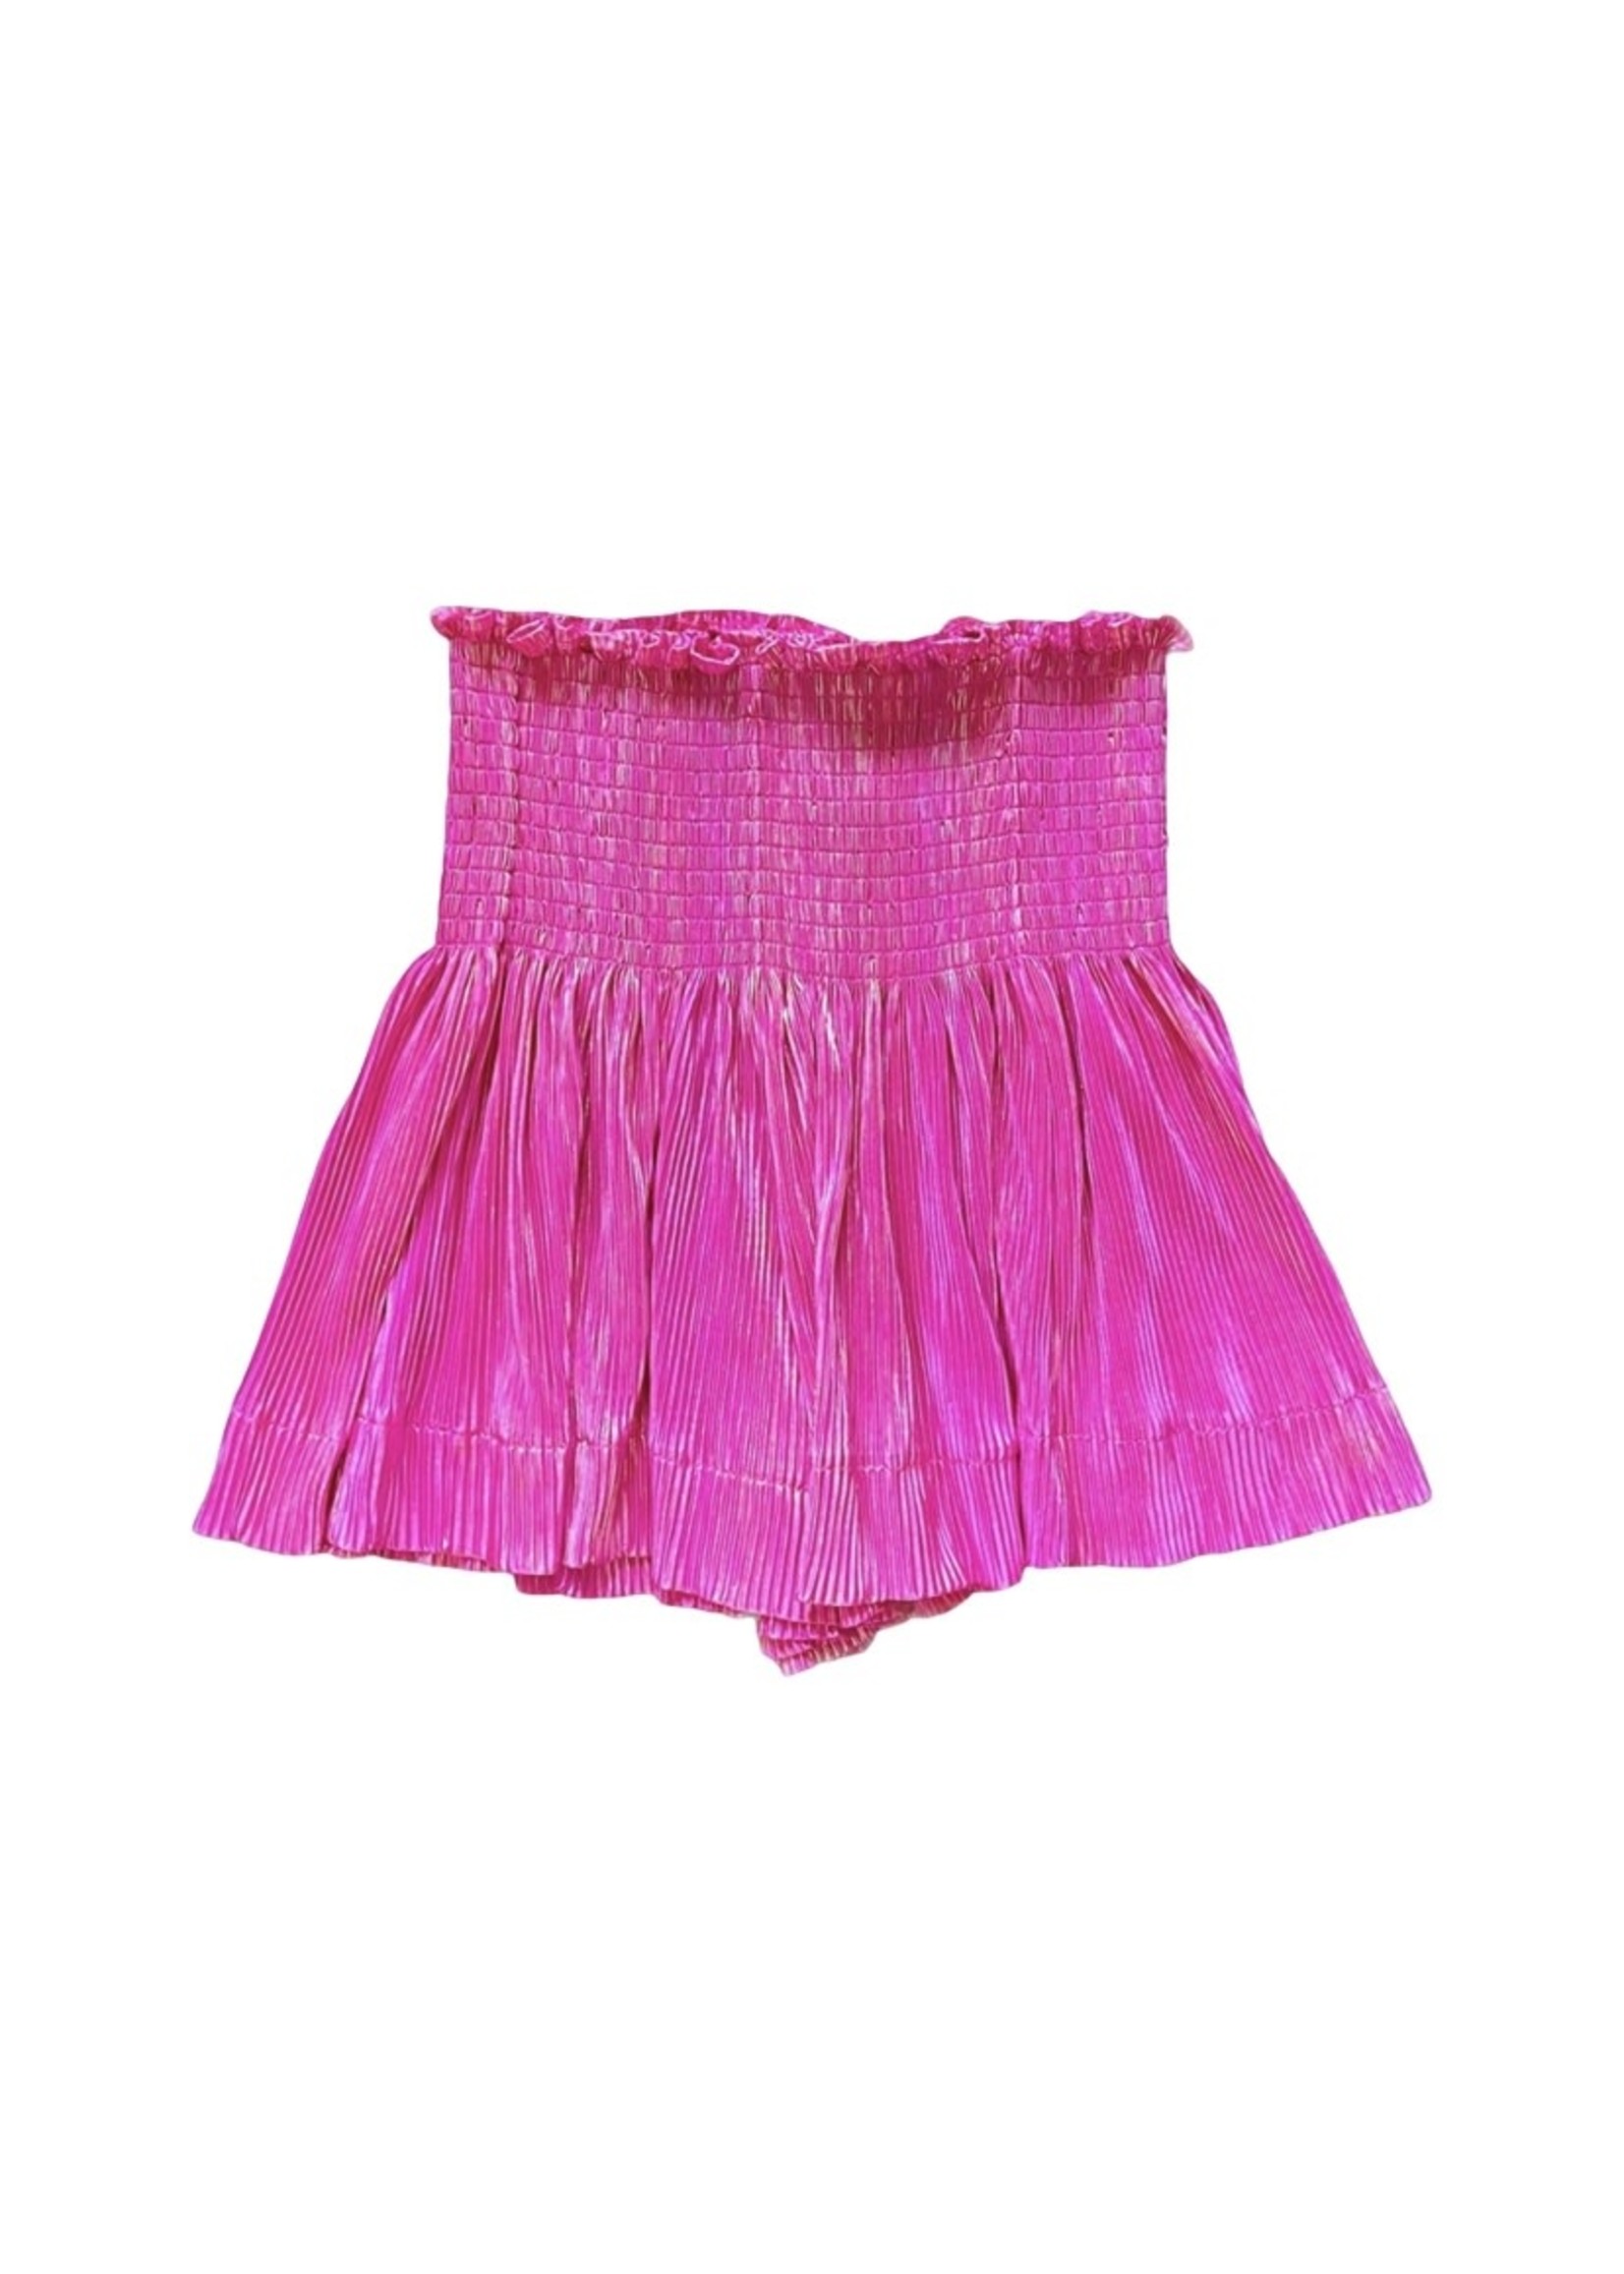 Queen of Sparkles Queen Of Sparkles Hot Pink Pleat Swing Shorts